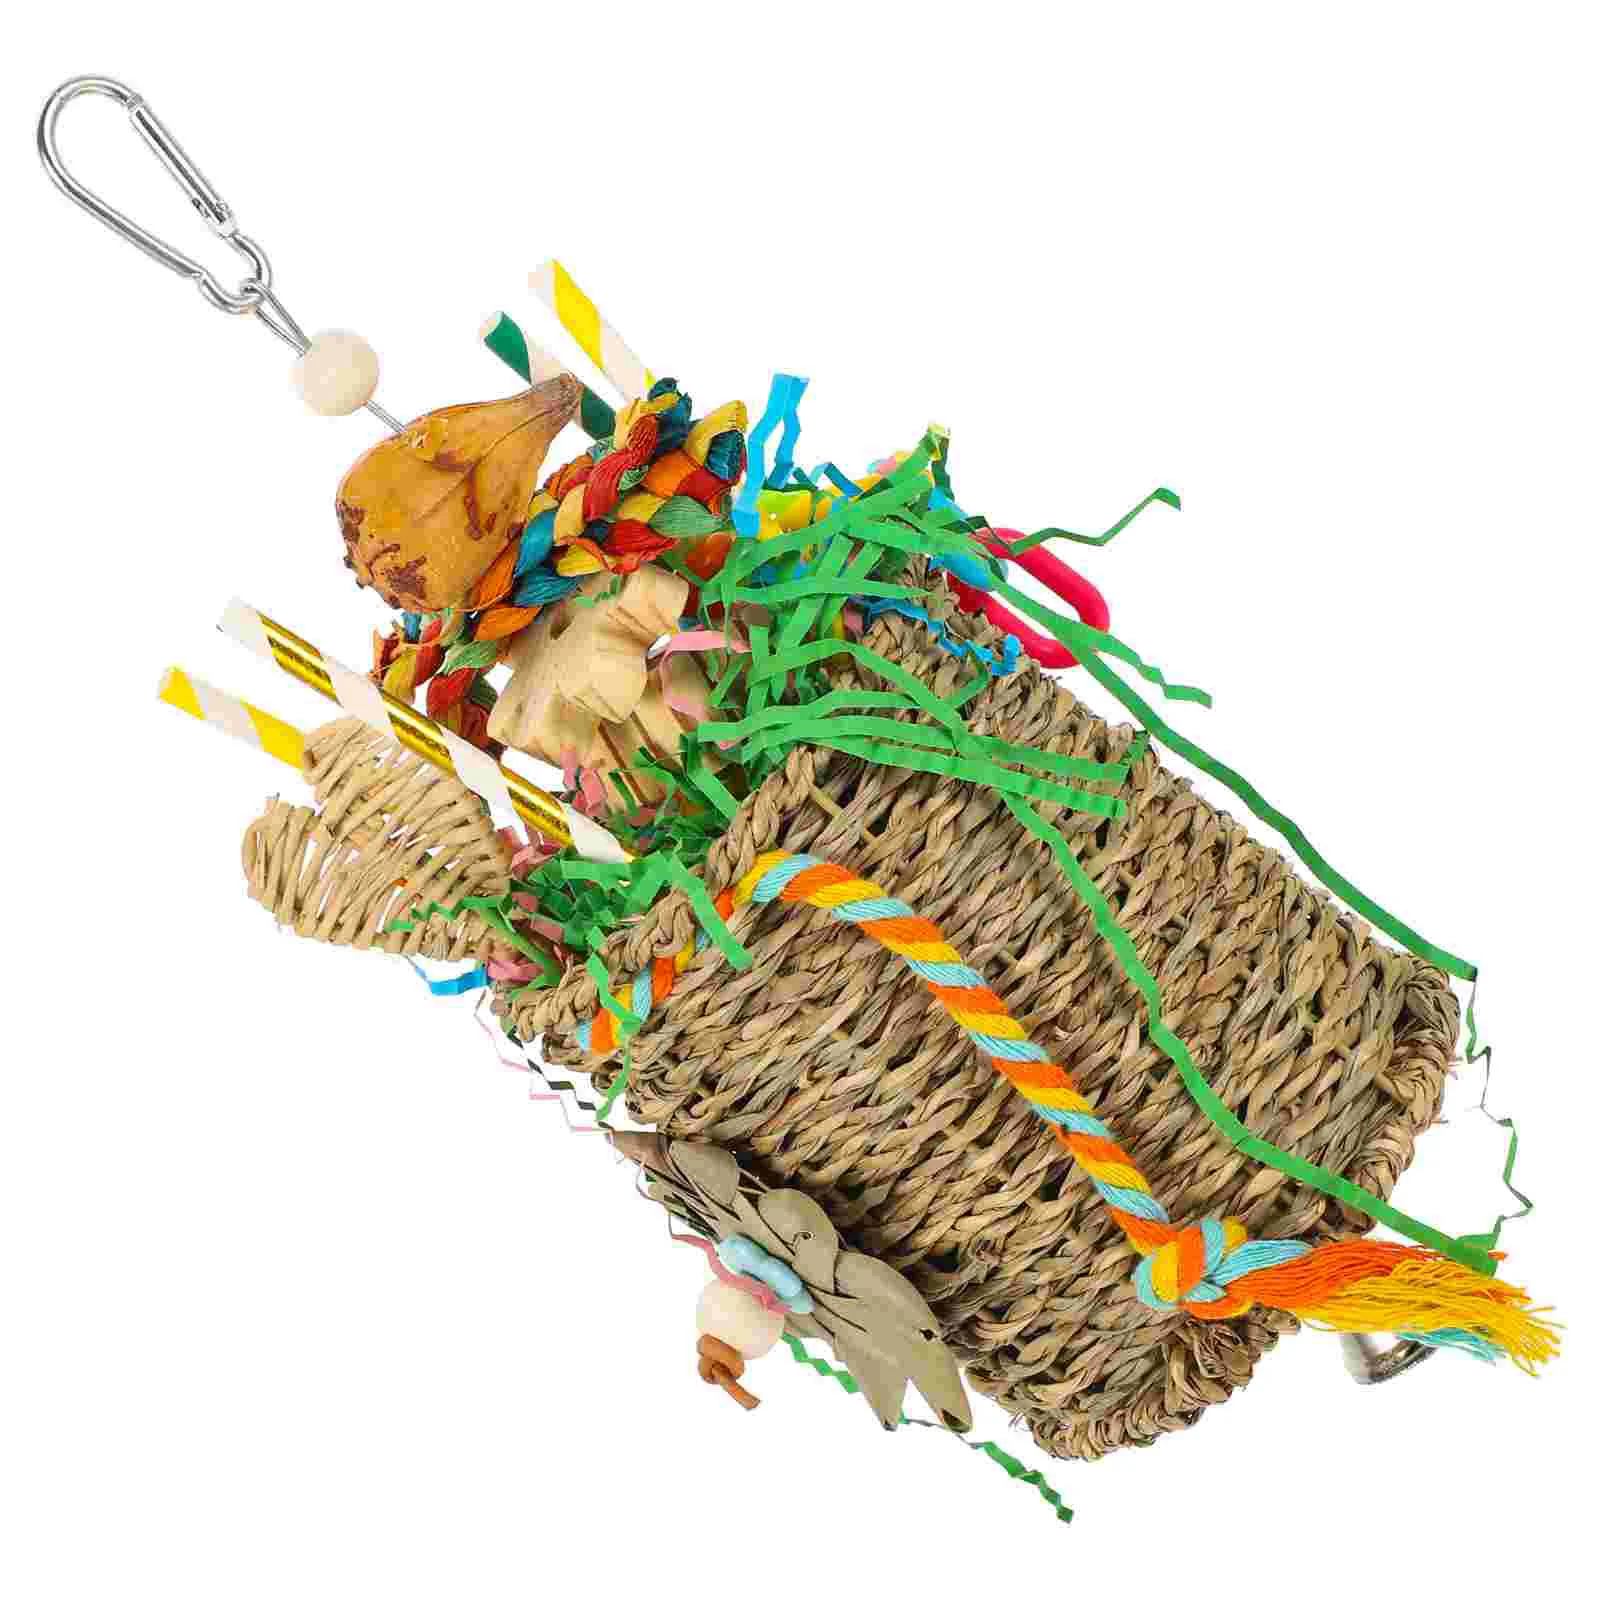 

Toy Bird Toys Foraging Shredder Parrot Cage Shred Chewing Wood Chew Parakeet Hanging Hammock Swing Bite Parrots Accessories